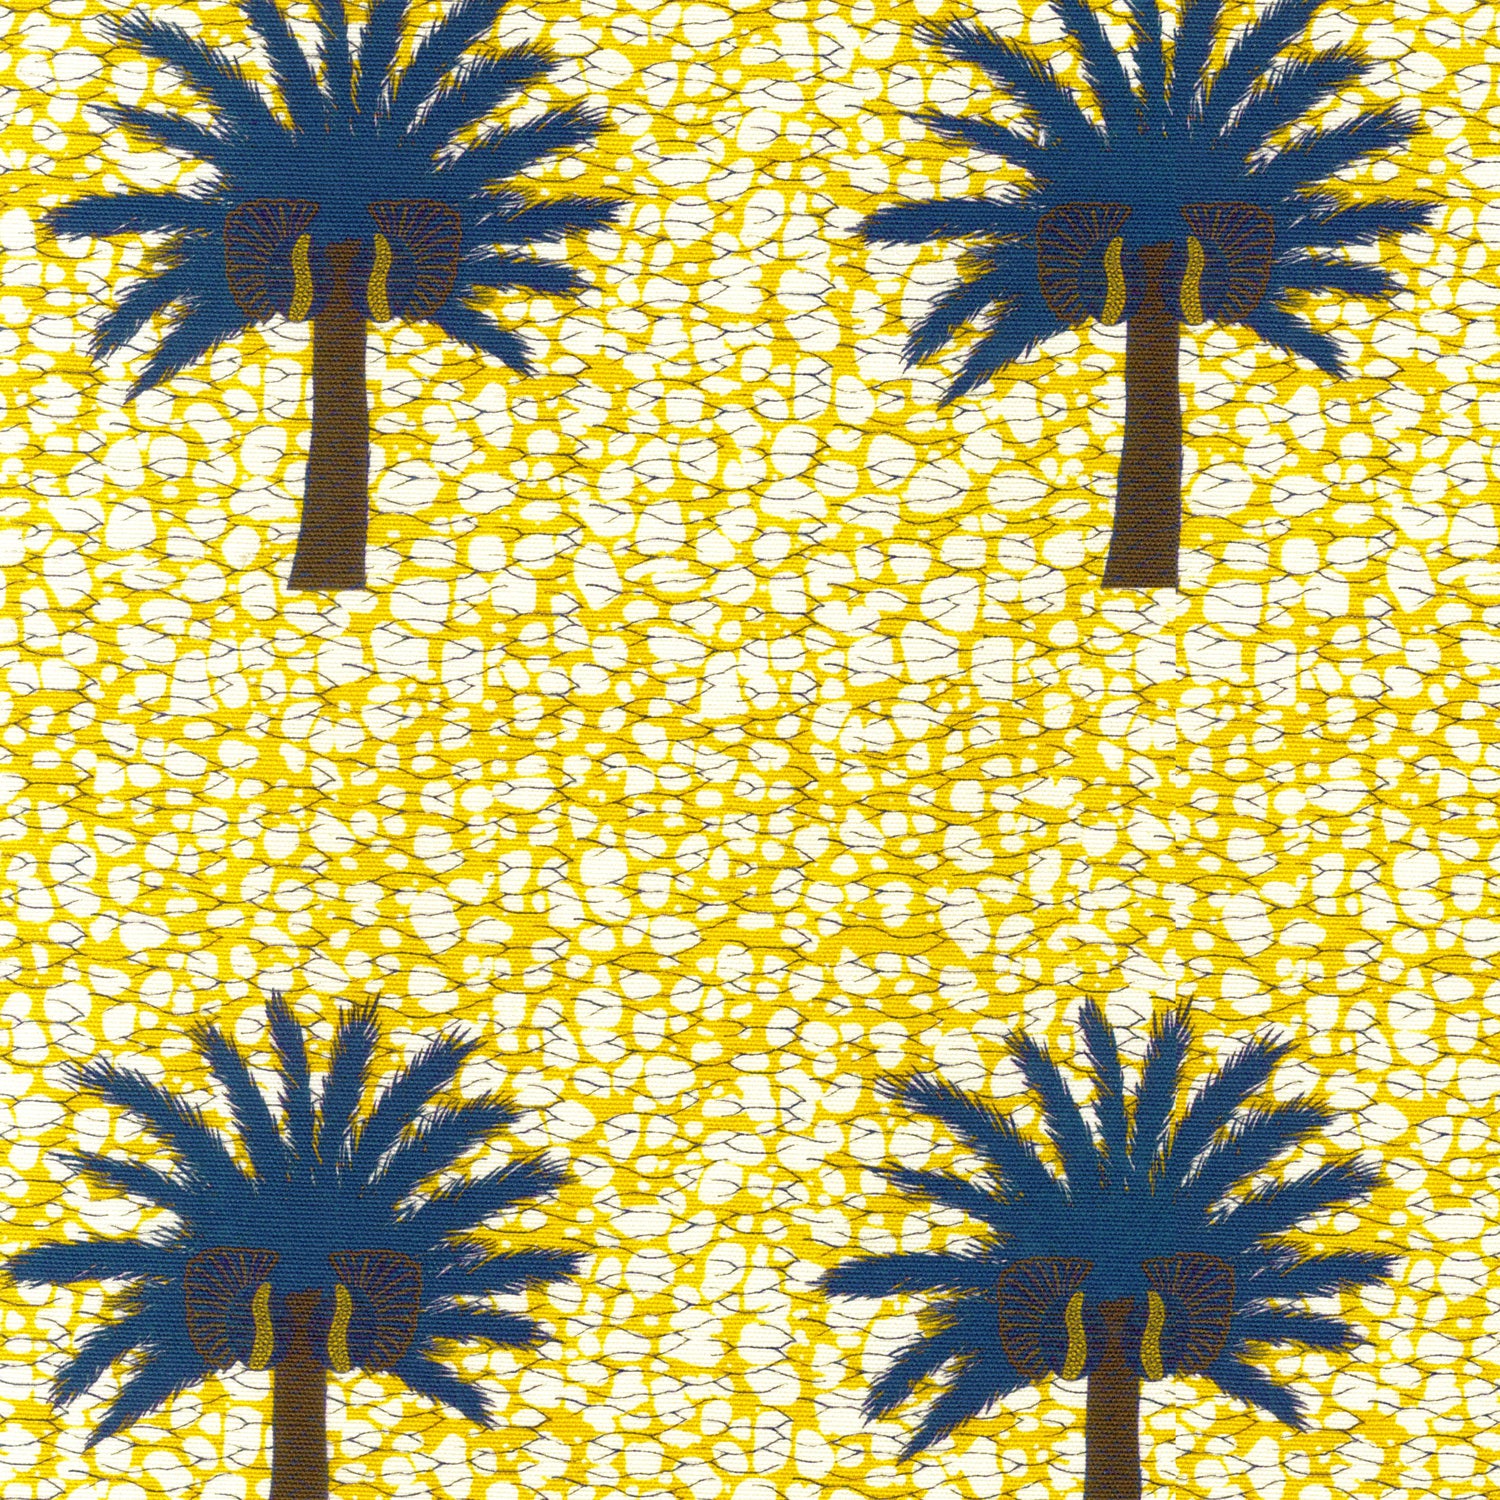 Detail of fabric in a repeating palm tree print on a mottled field in shades of brown, navy, yellow and white.